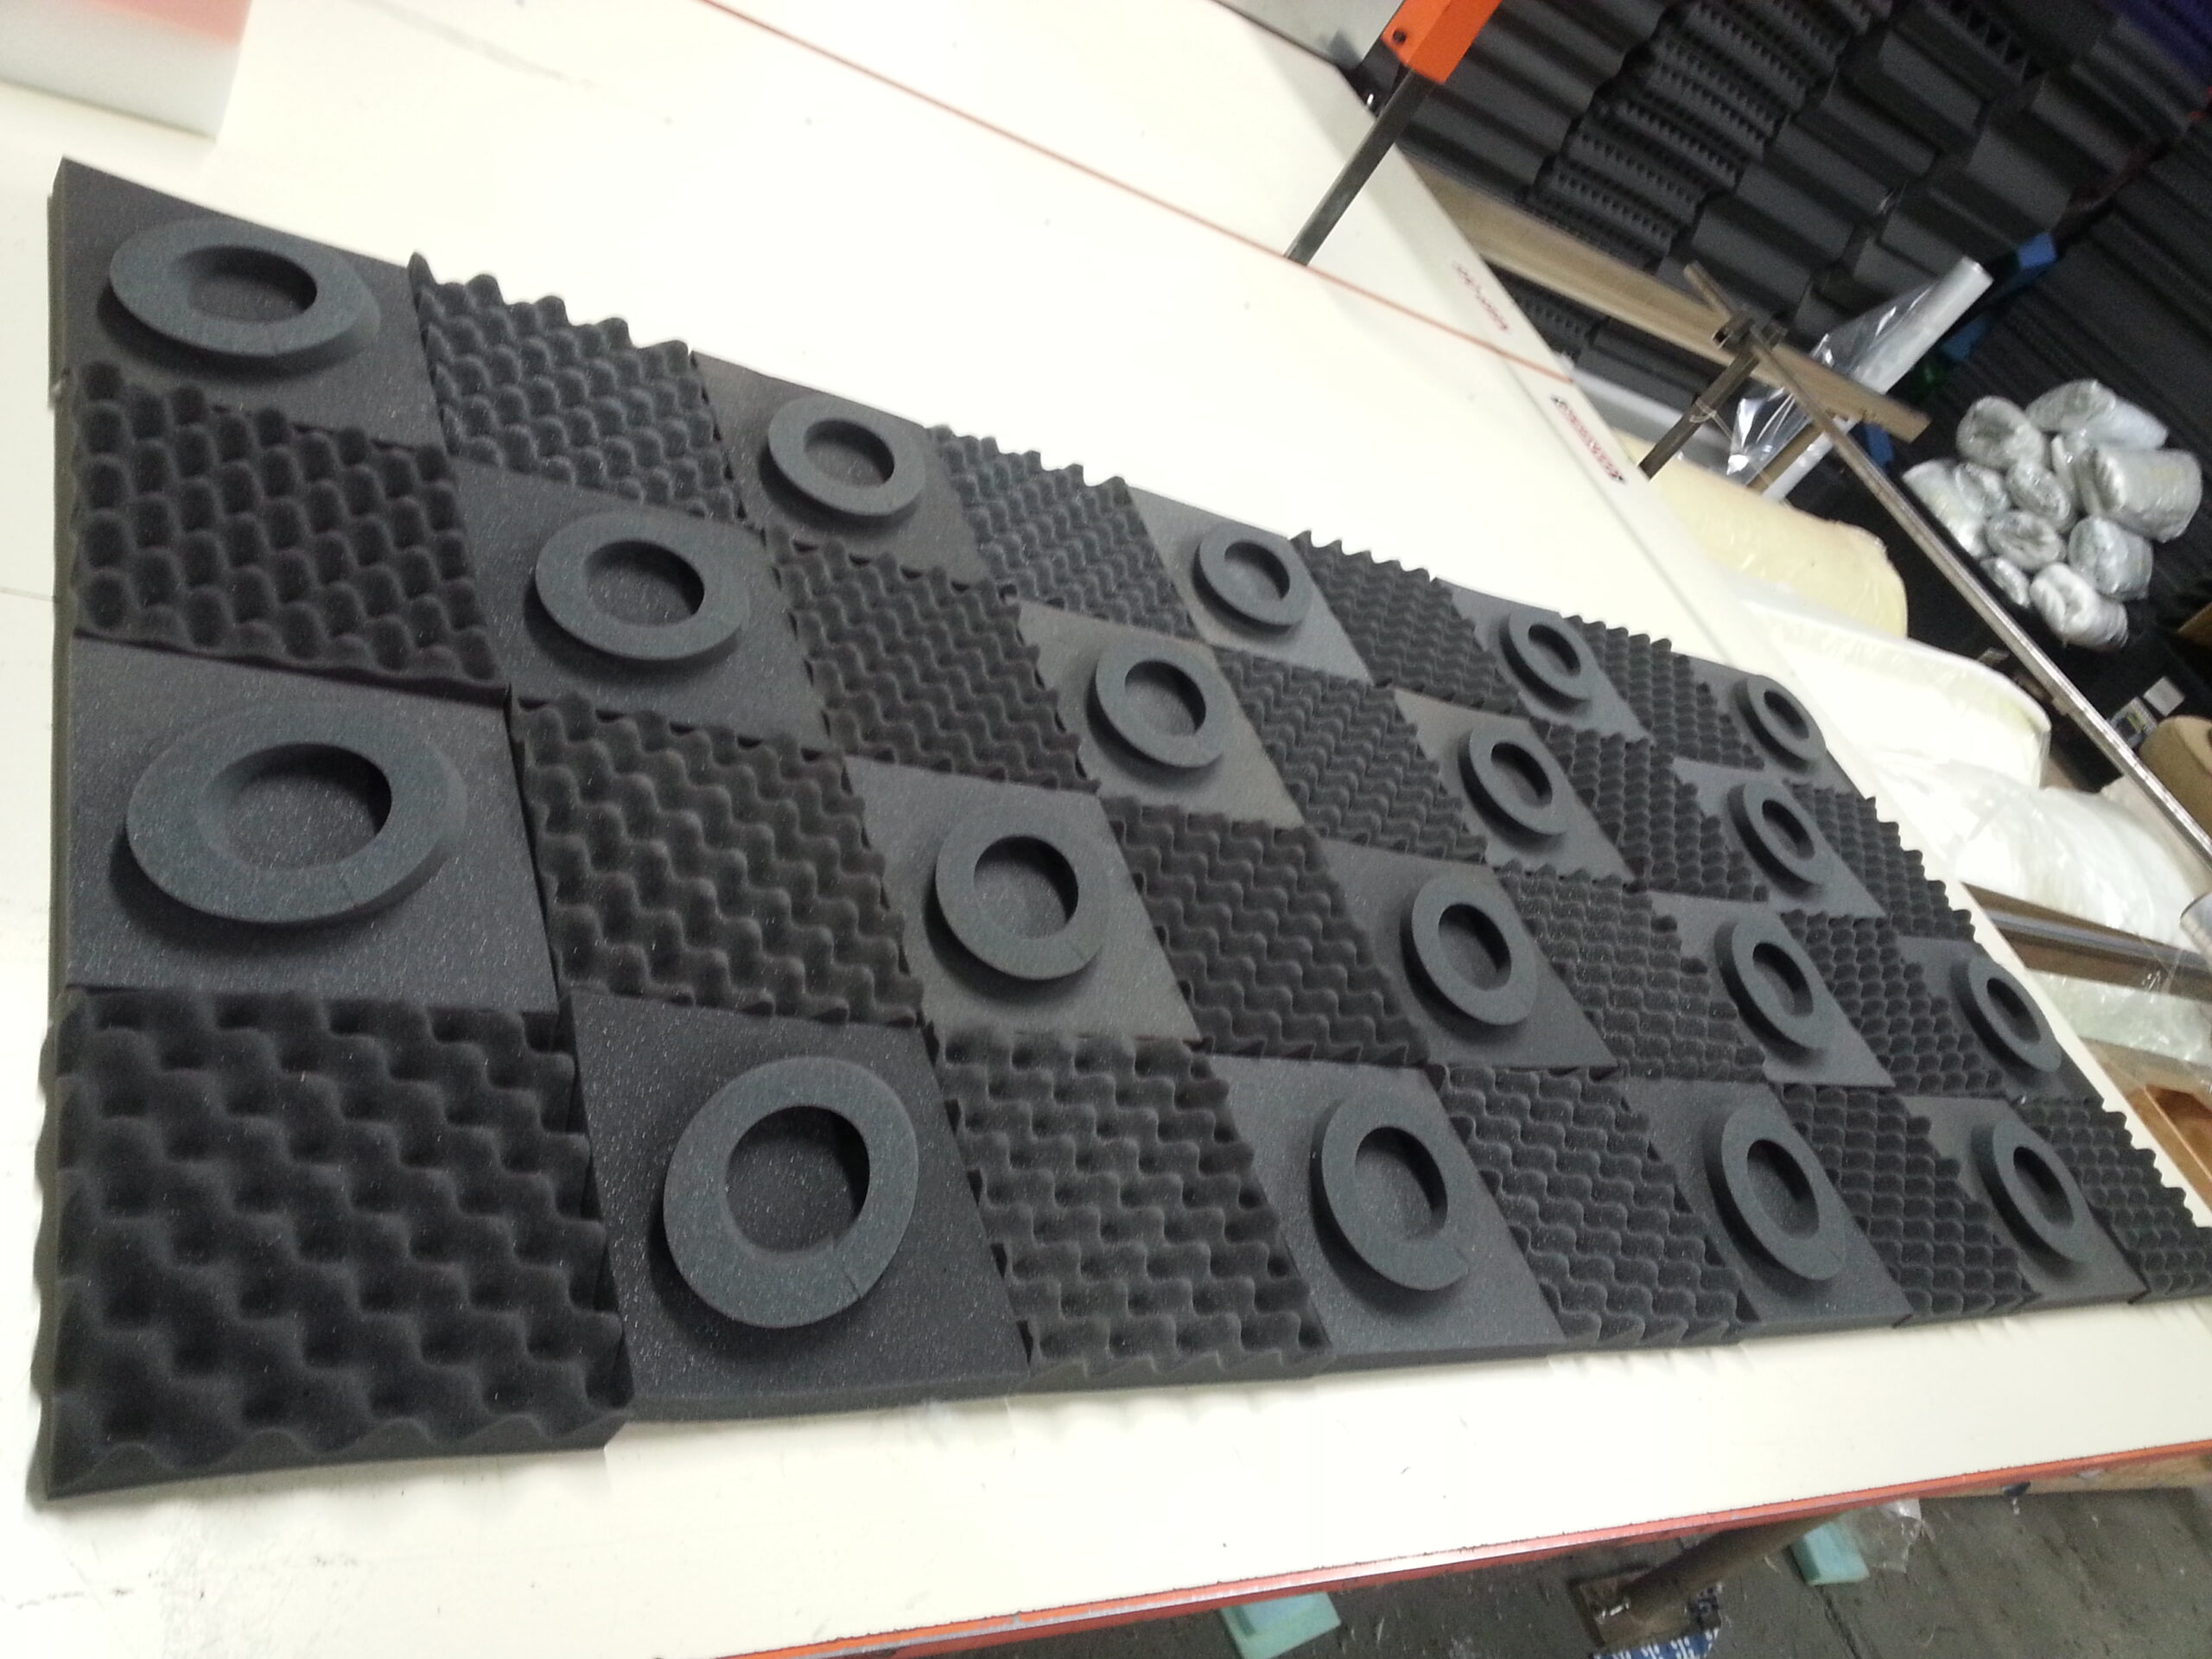 Acoustic eggcrate with ovals